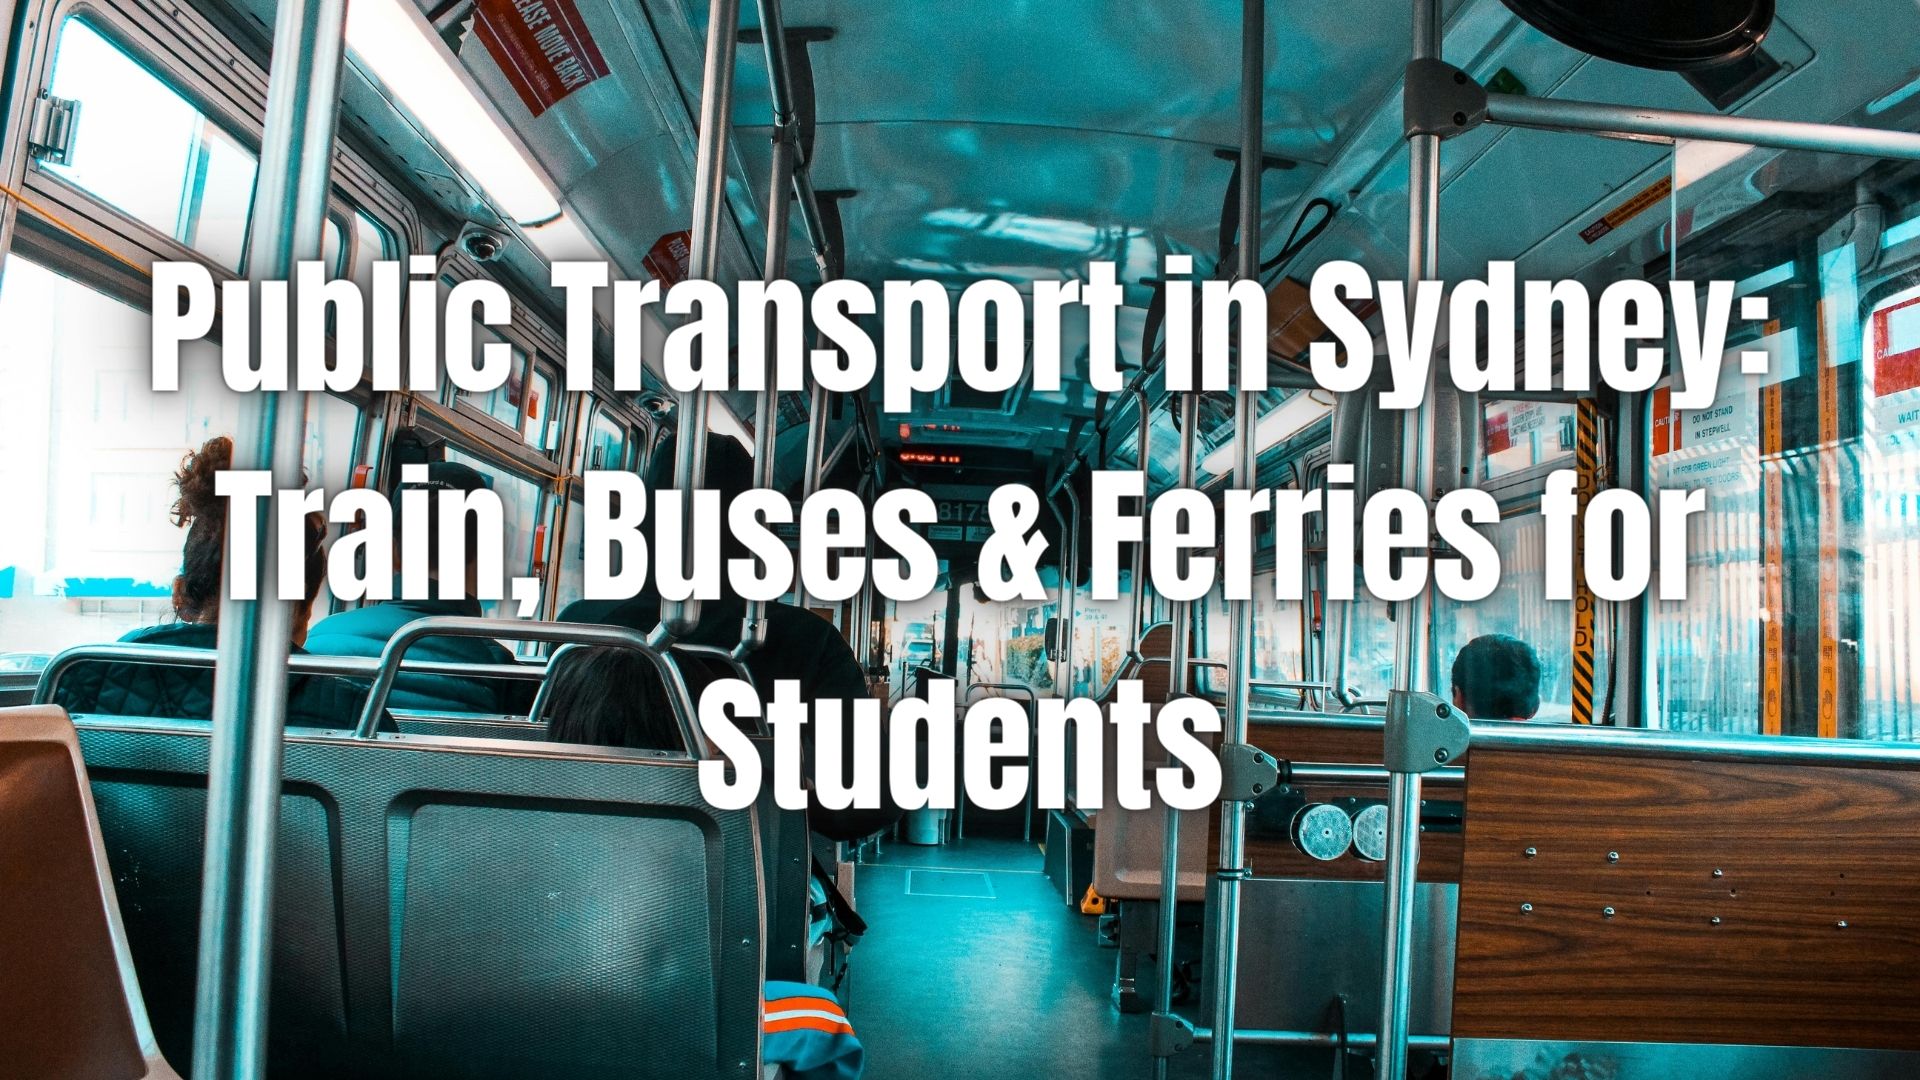 Public Transport Sydney: Student Guide! Master trains, buses, and ferries for affordable travel. Explore Sydney your way.